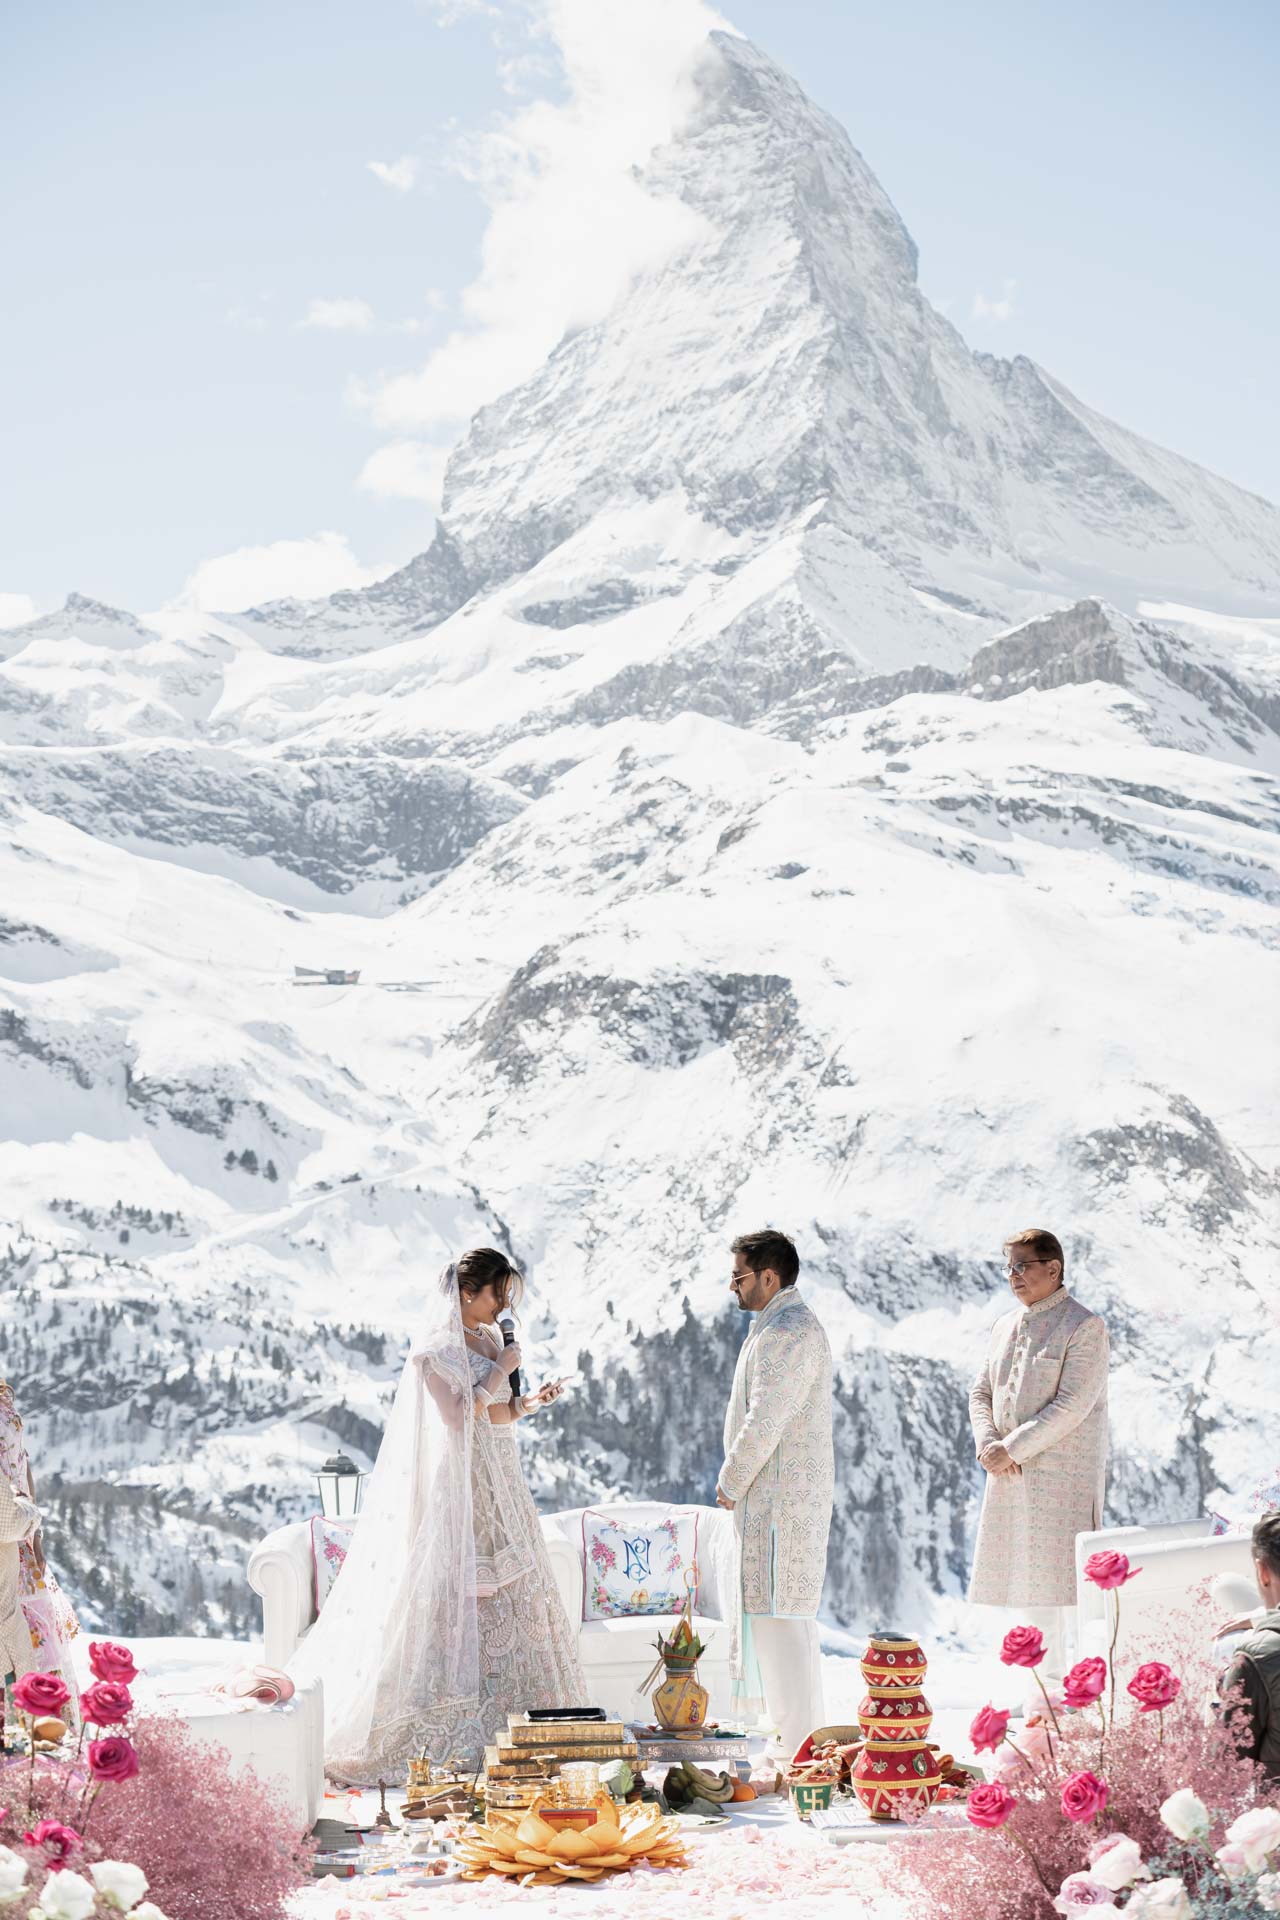 A wedding on the slopes of Matterhorn mountain, between the white of snow and the colors of India :: 31